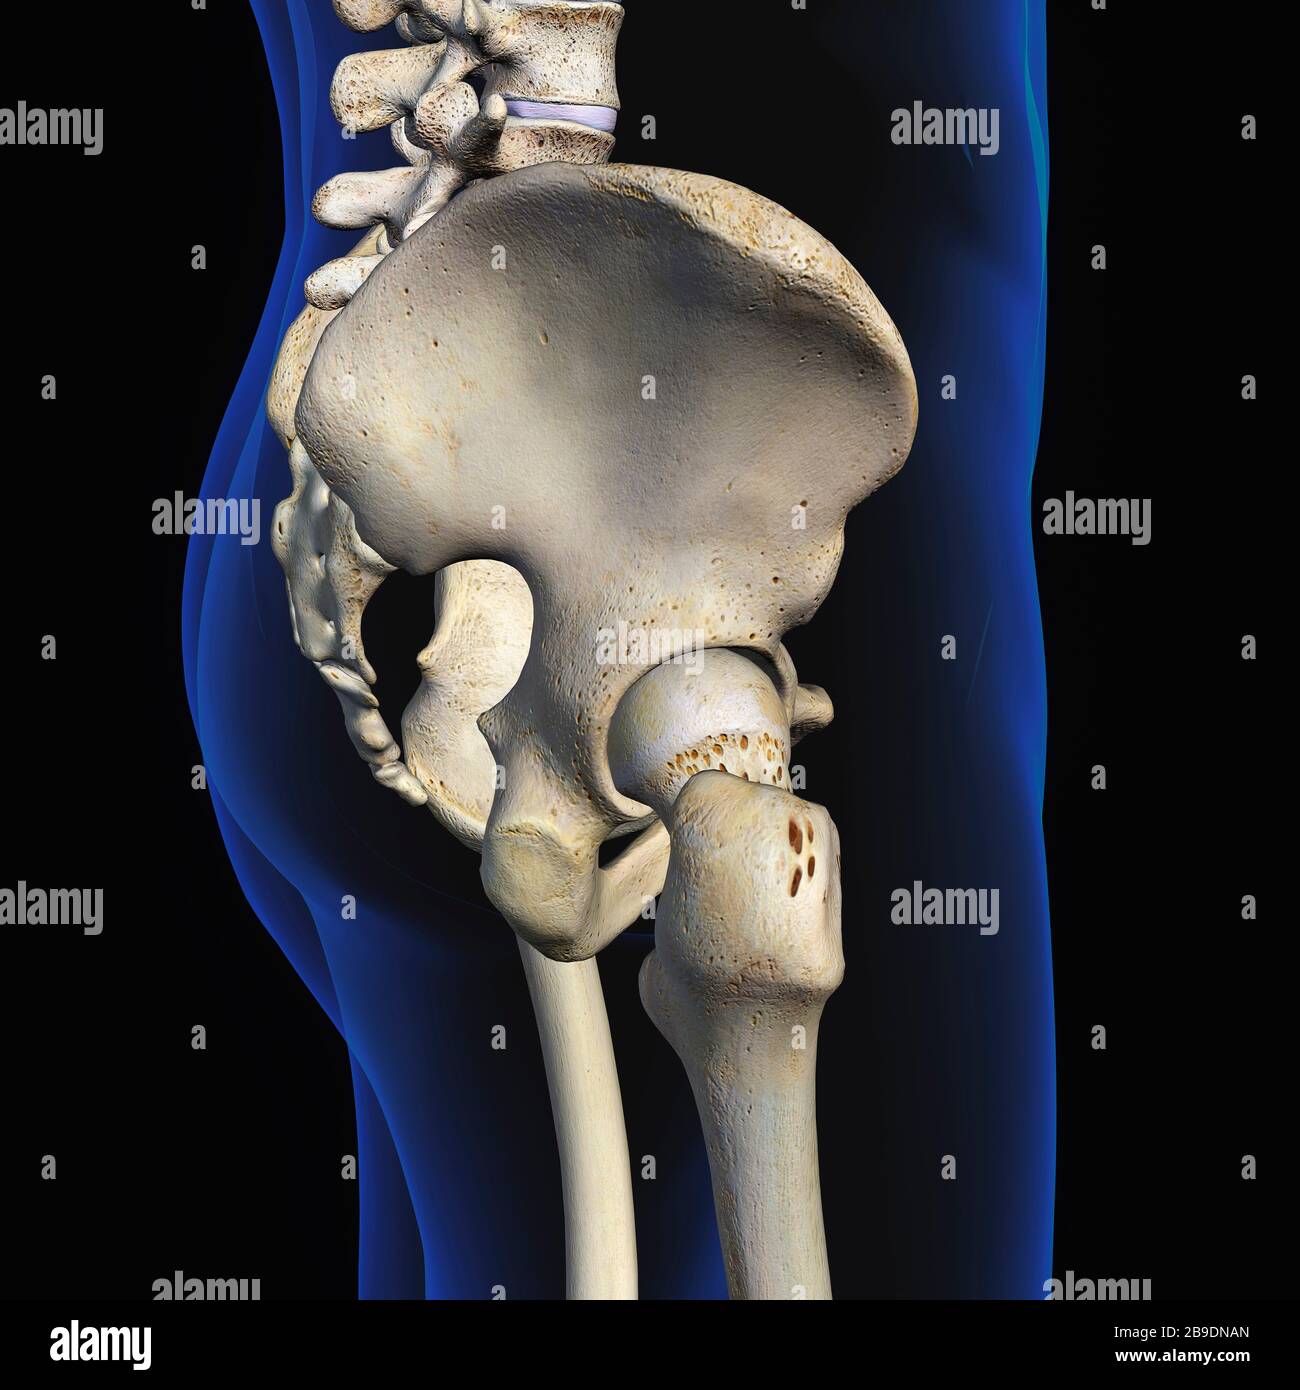 Lateral view of male pelvis, hip, and leg bones on a black background. Stock Photo